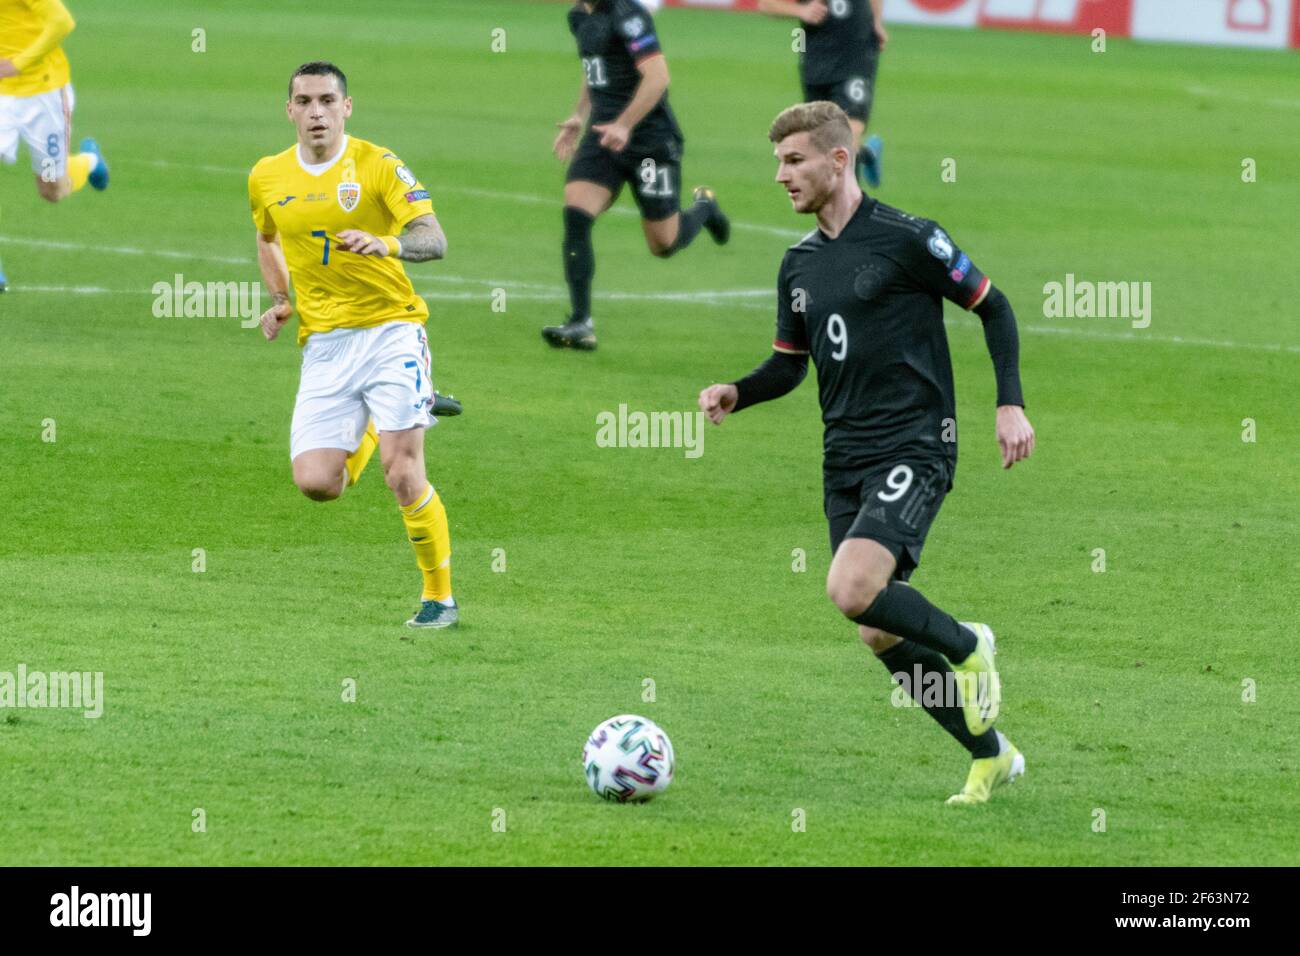 Bucharest, Romania. 28th Mar, 2021. Timo Werner #9 of Germany and Nicolae Stanciu #7 of Romania during the FIFA World Cup 2022 Qualifying Round match between the national teams of Romania and Germany at National Arena in Bucharest, Romania. 28.03.2021. Photo: Copyright 2020, Credit: Cronos/Alamy Live News Stock Photo